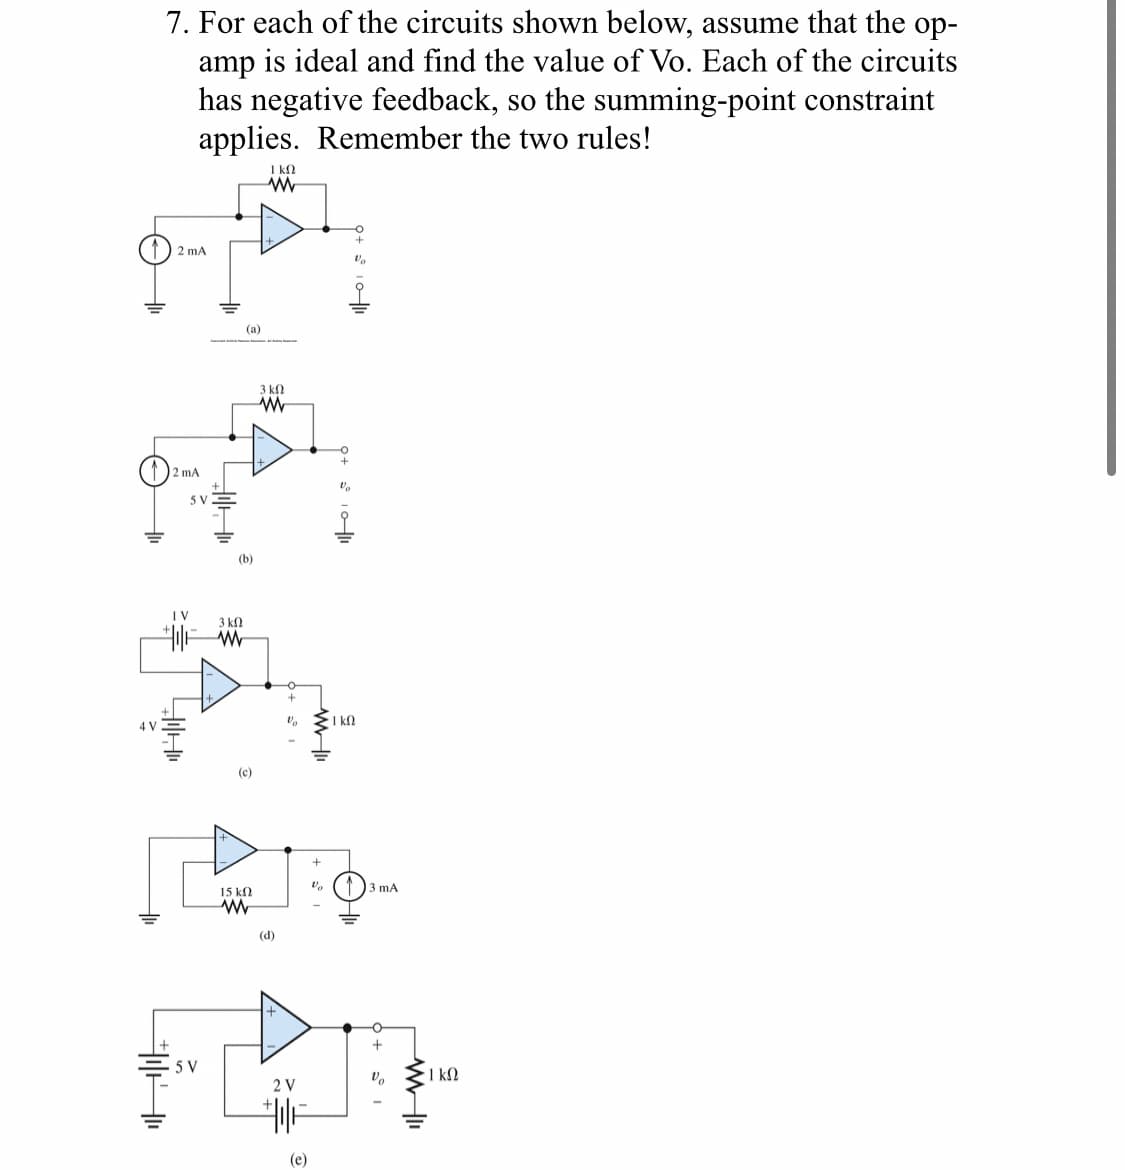 7. For each of the circuits shown below, assume that the op-
amp is ideal and find the value of Vo. Each of the circuits
has negative feedback, so the summing-point constraint
applies. Remember the two rules!
ΓΚΩ
ww
2 mA
4 V
2 mA
5 V
(a)
(b)
1 V
3 ΚΩ
W
A
3 ΚΩ
www
(c)
Vo
Va
· Ι ΚΩ
+
Va
3 mA
15 ΚΩ
w
(d)
>
5 V
2 V
||+
(e)
+
5°1
- 1 ΚΩ